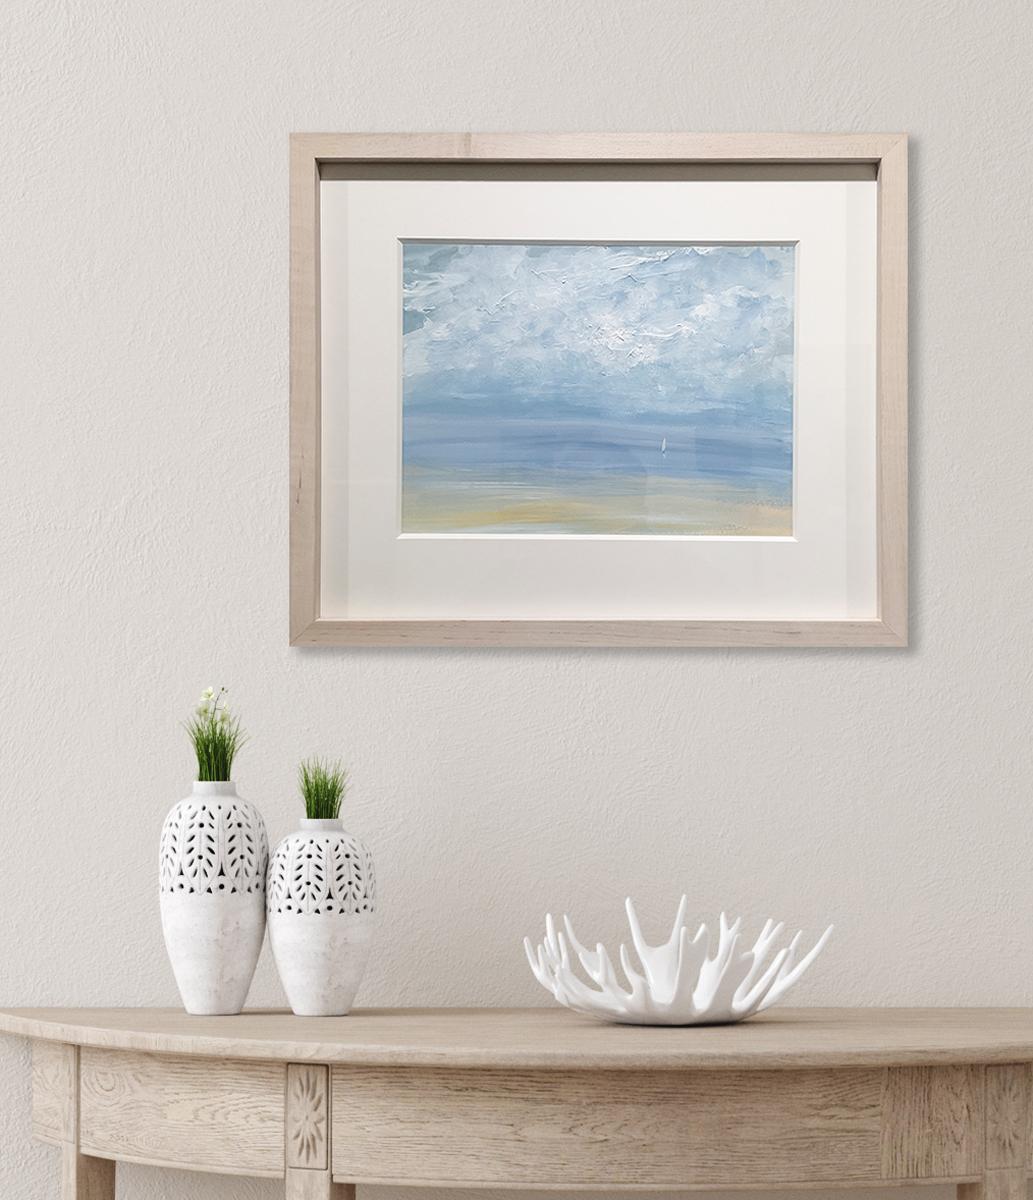 This contemporary seascape painting by S.C. Aldo is made with acrylic paint on Arches paper. It depicts a loose, abstracted coastal scene with a light blue sky, textured abstract clouds and a small white sailboat sailing near the horizon. A sandy